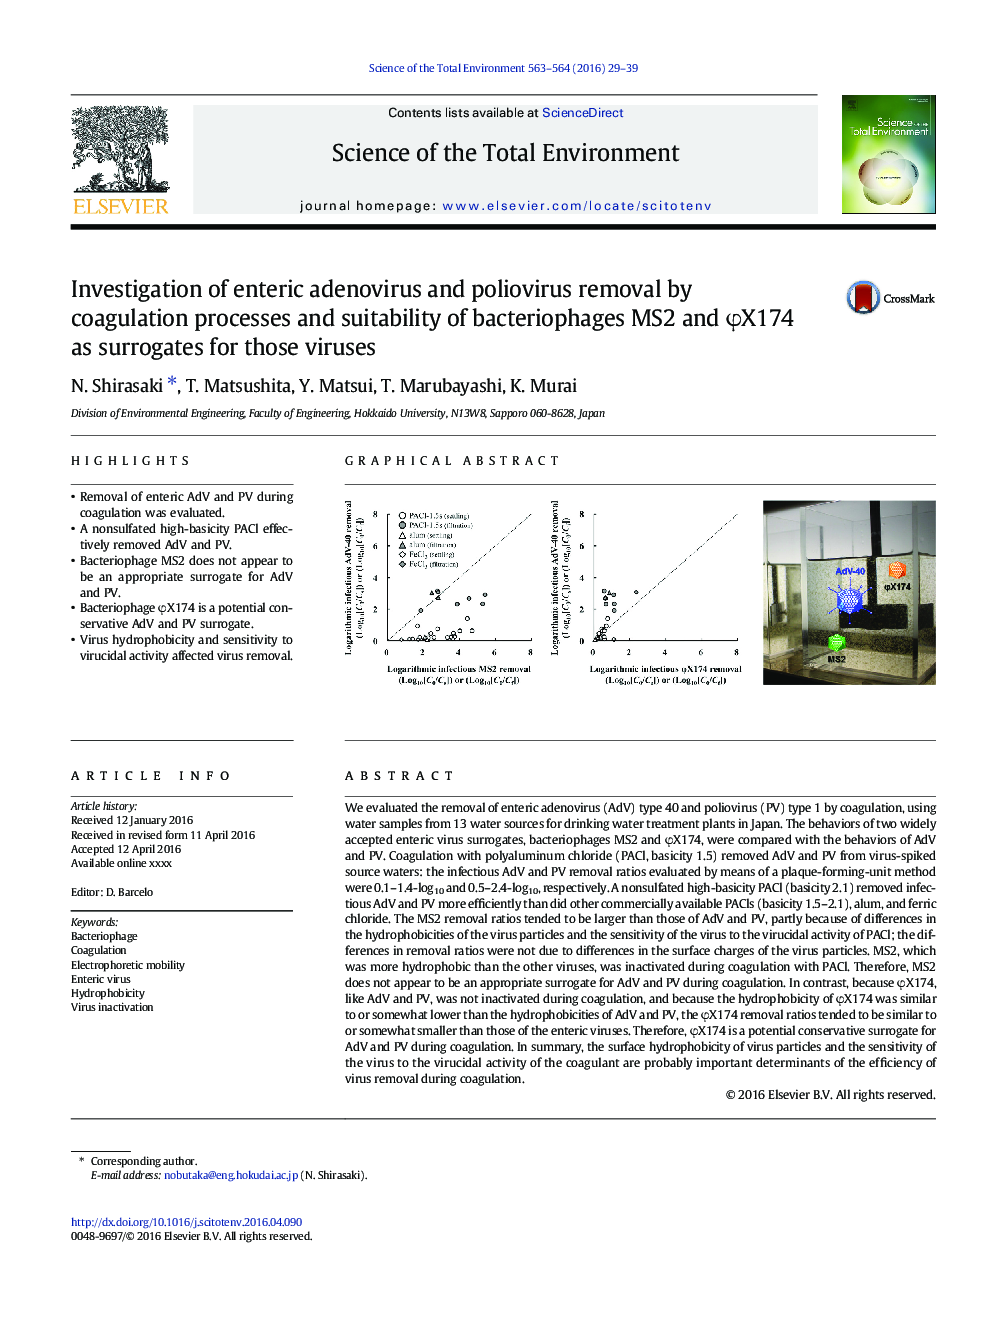 Investigation of enteric adenovirus and poliovirus removal by coagulation processes and suitability of bacteriophages MS2 and ÏX174 as surrogates for those viruses